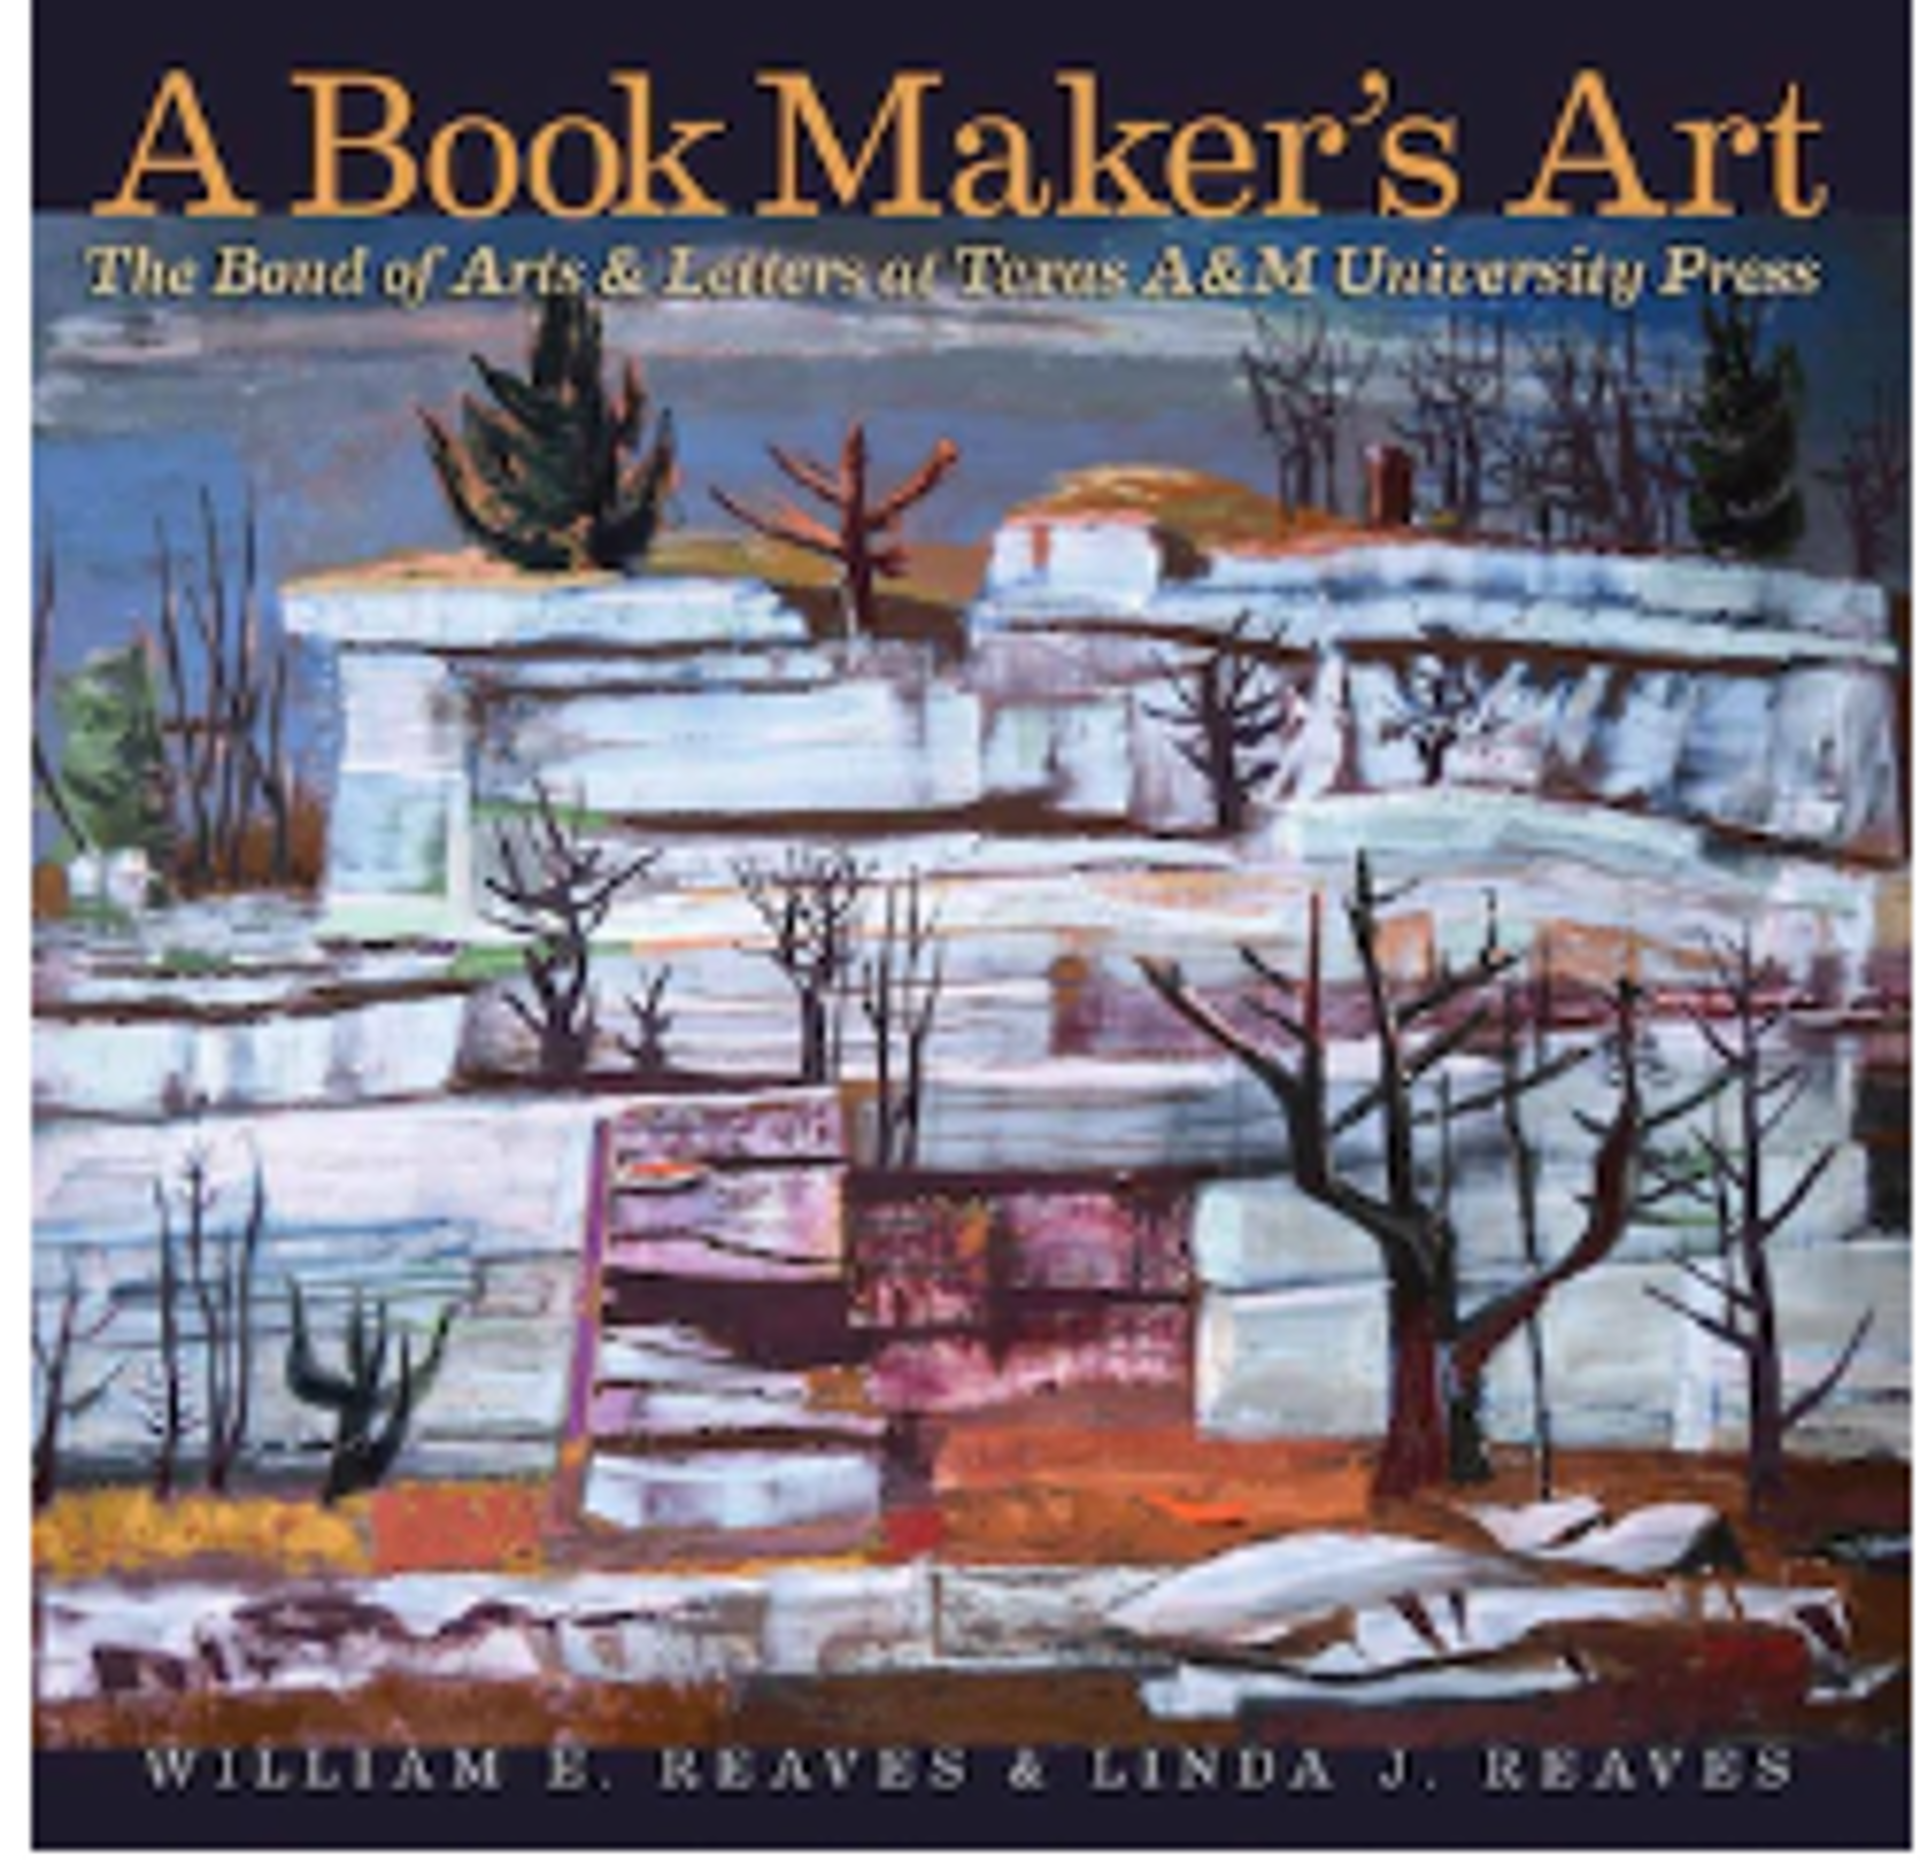 A Book Maker's Art The Bond of Arts and Letters at Texas A&M University Press By William E. Reaves Jr. and Linda J. Reavesrs at Texas A&M University Press By William E. Reaves Jr. and Linda J. Reaves by Publications